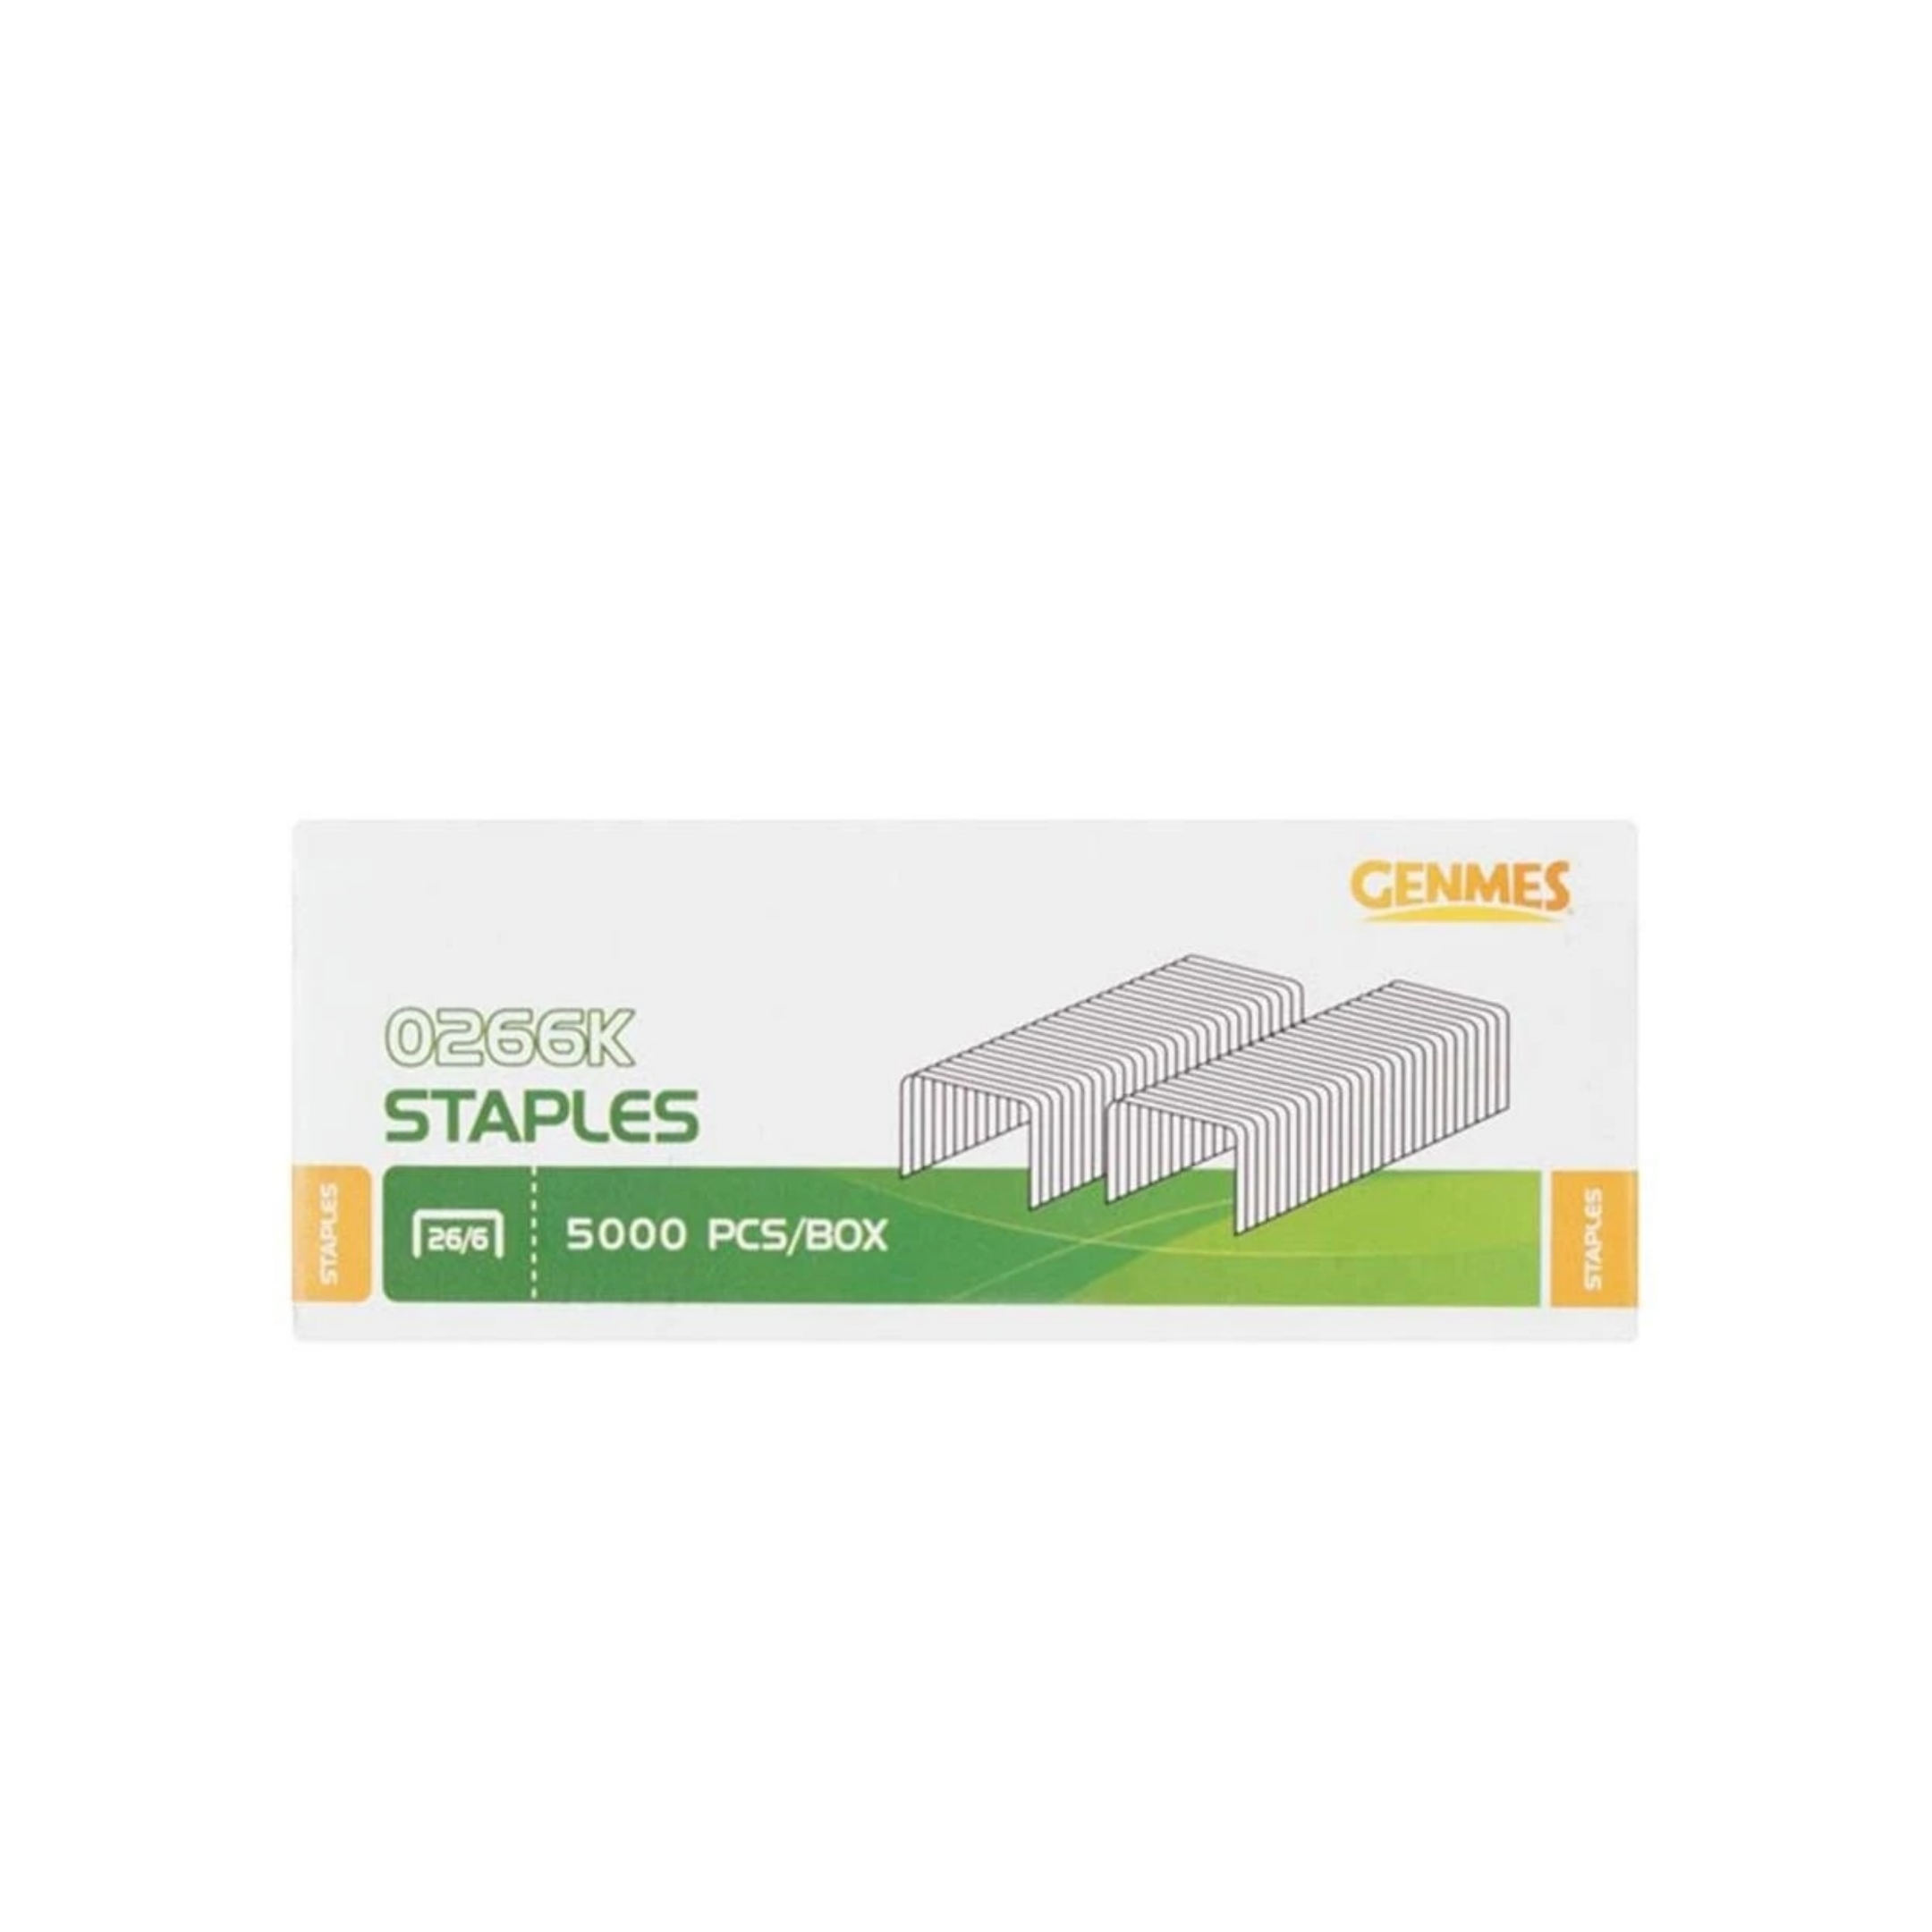 Staples 26/6 Genmes 5000's